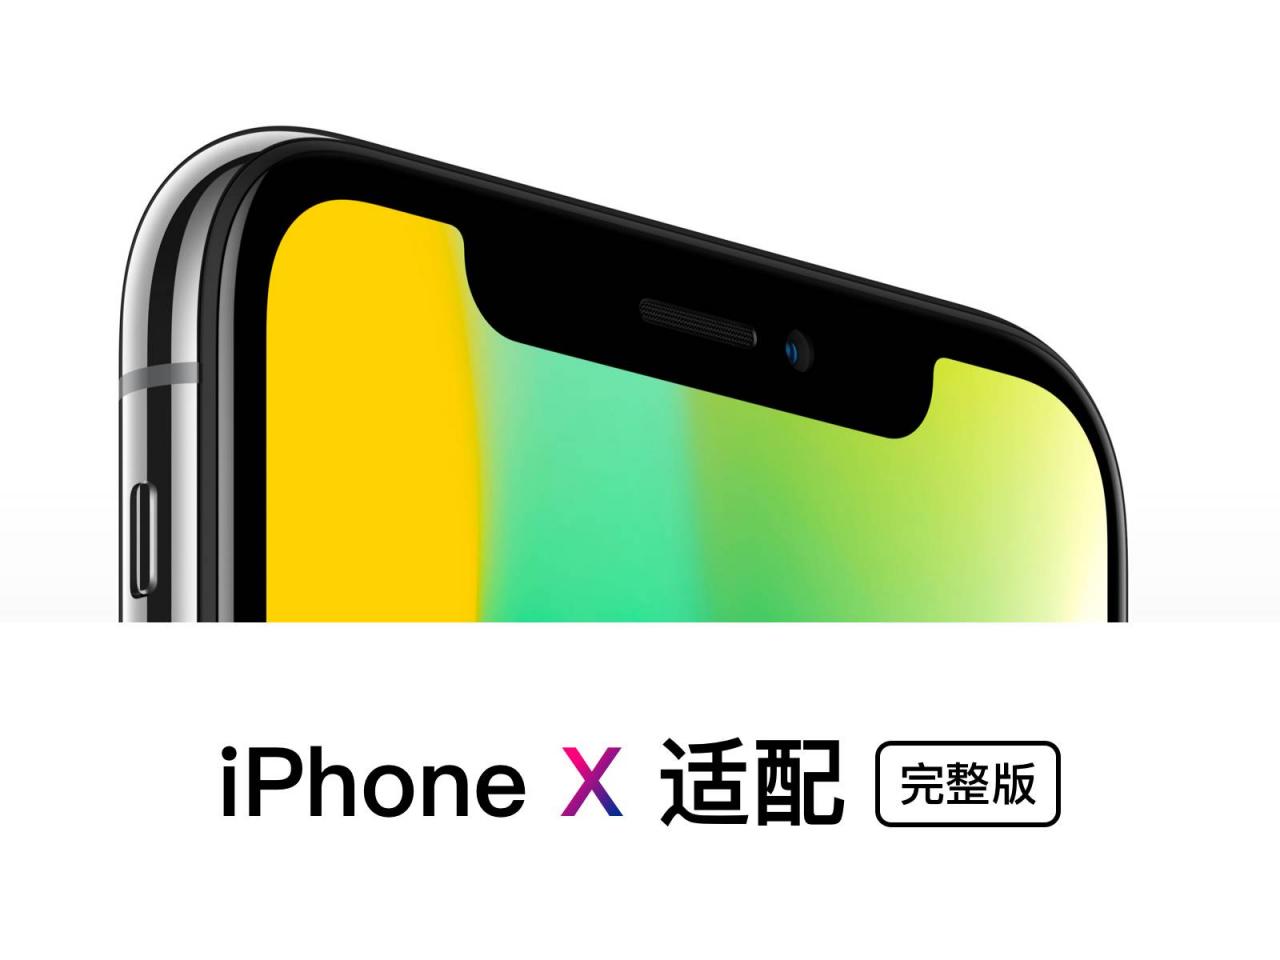 iphone-x-design-size-and-fit (7)